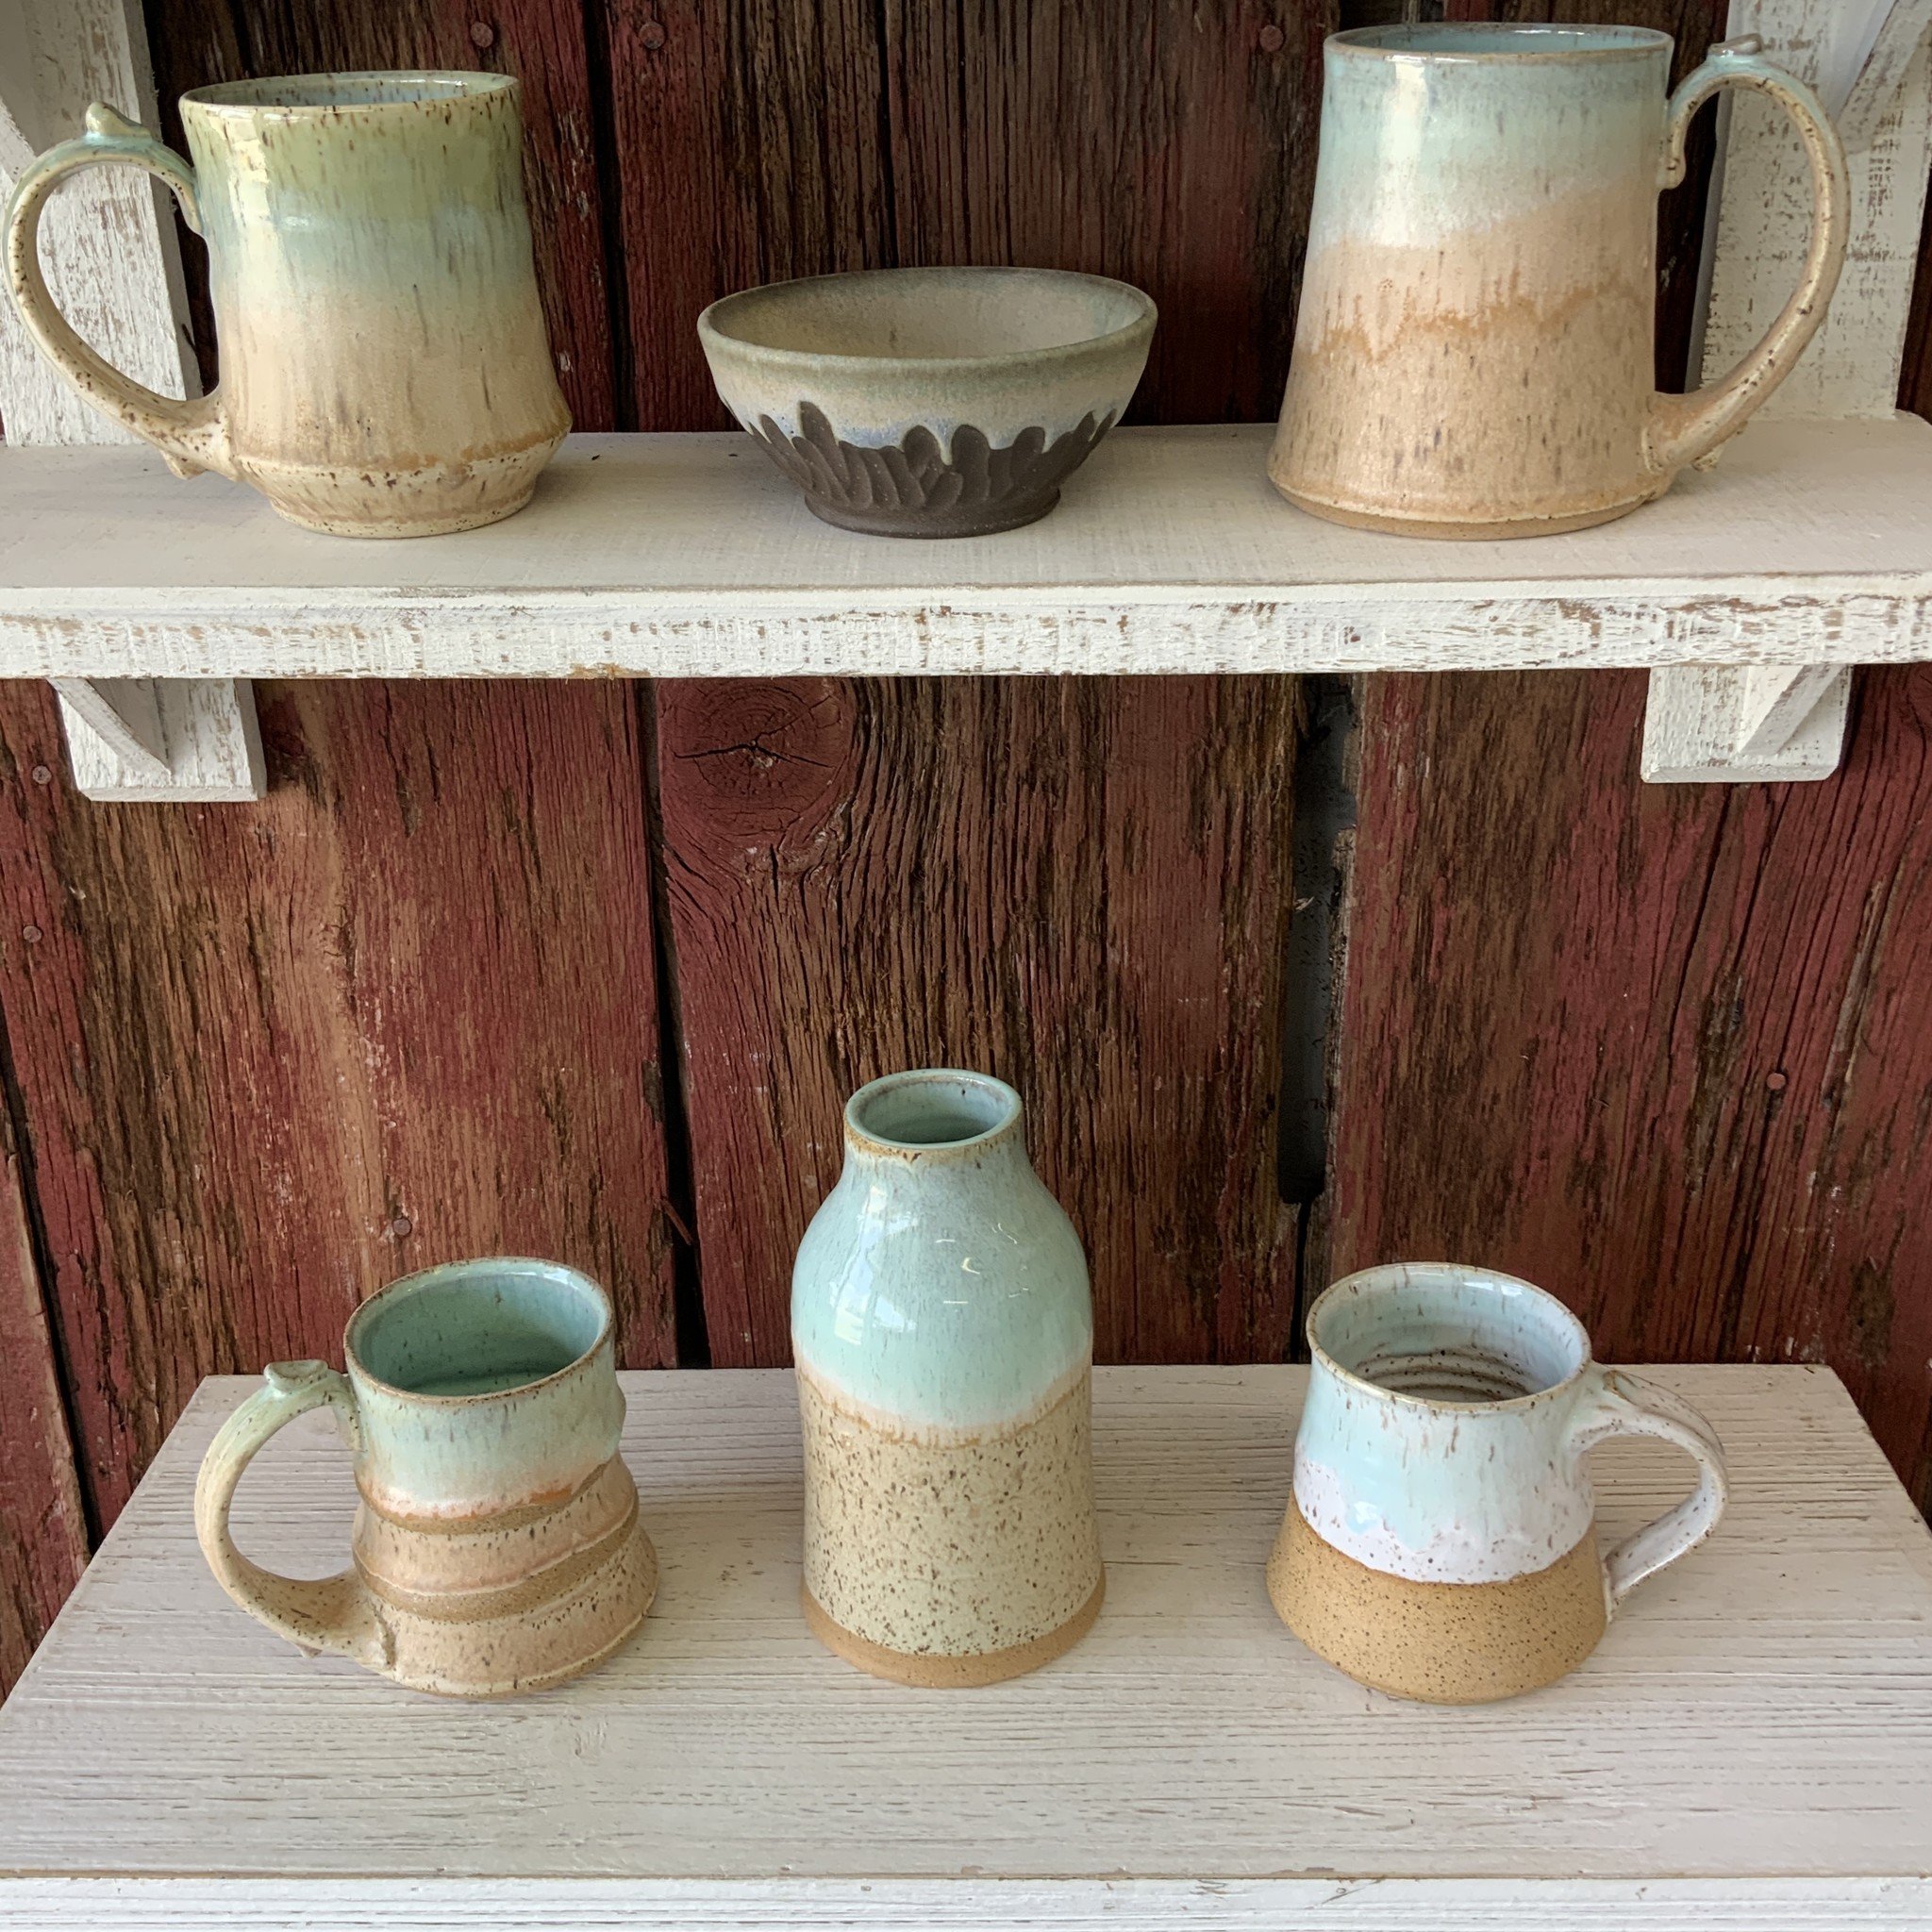 The Potter's Shop in Waukesha handmade pottery and gifts in Wisconsin